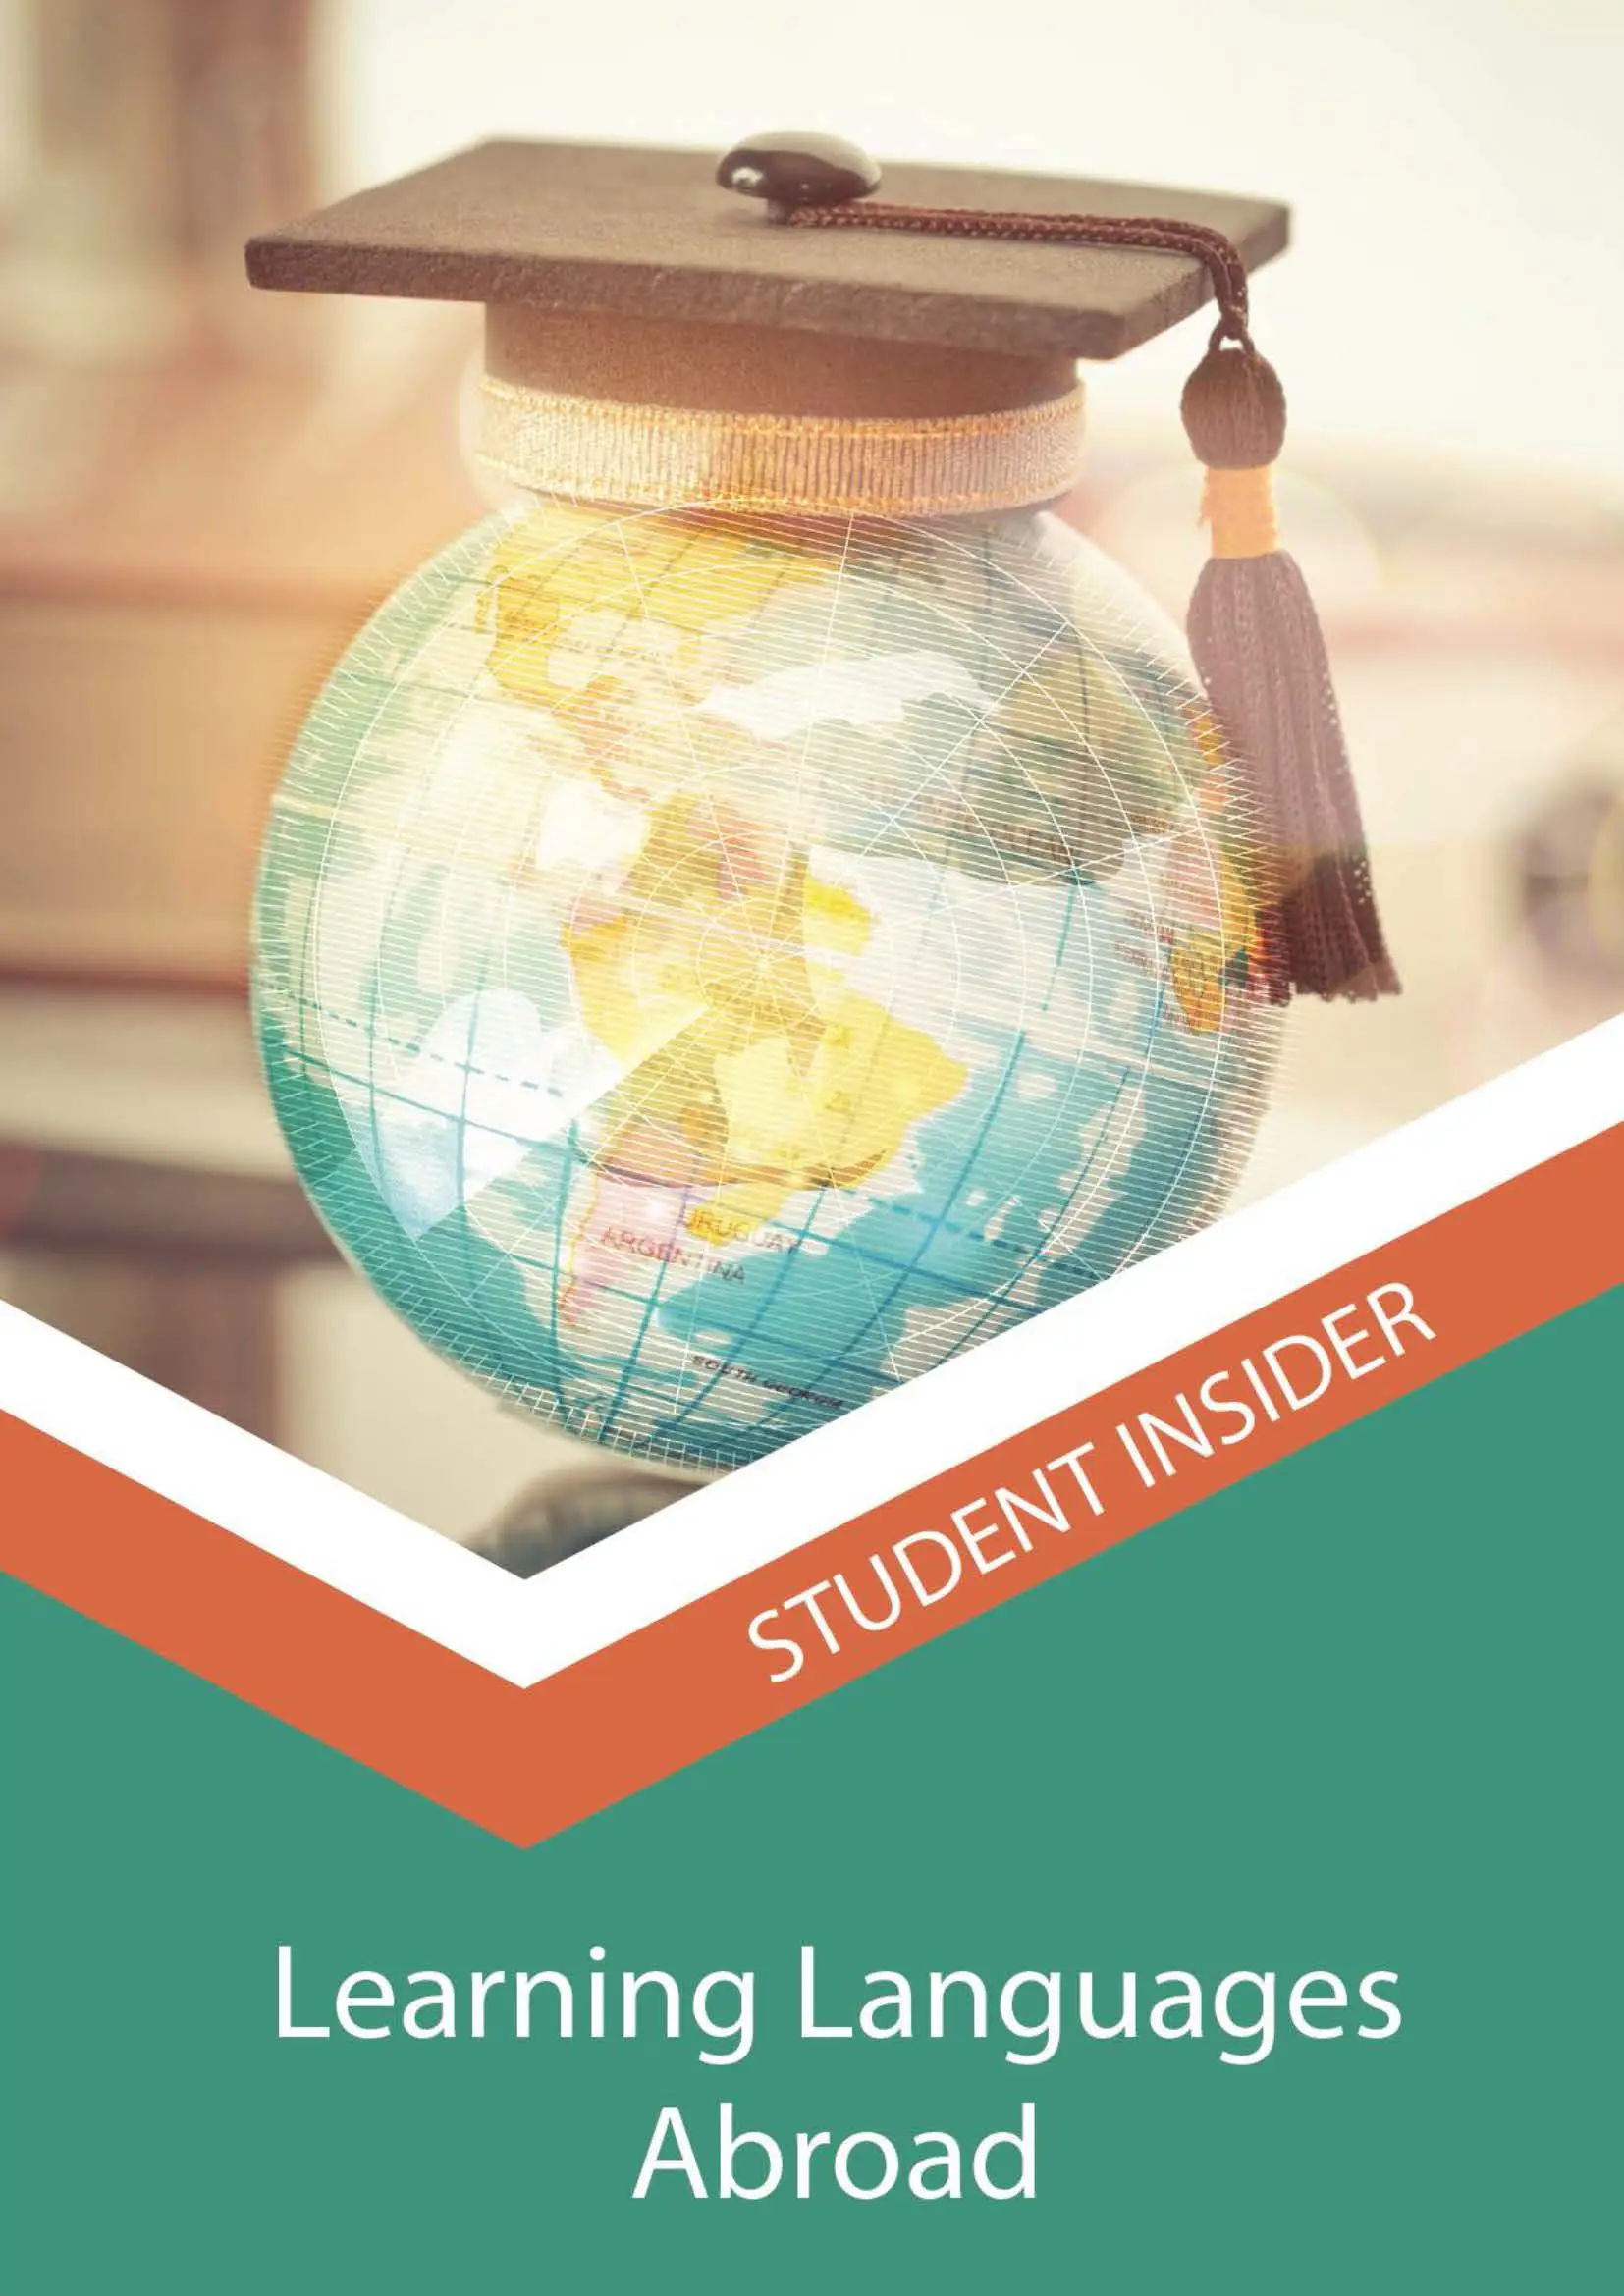 Student Insider Guide Learning Languages Abroad